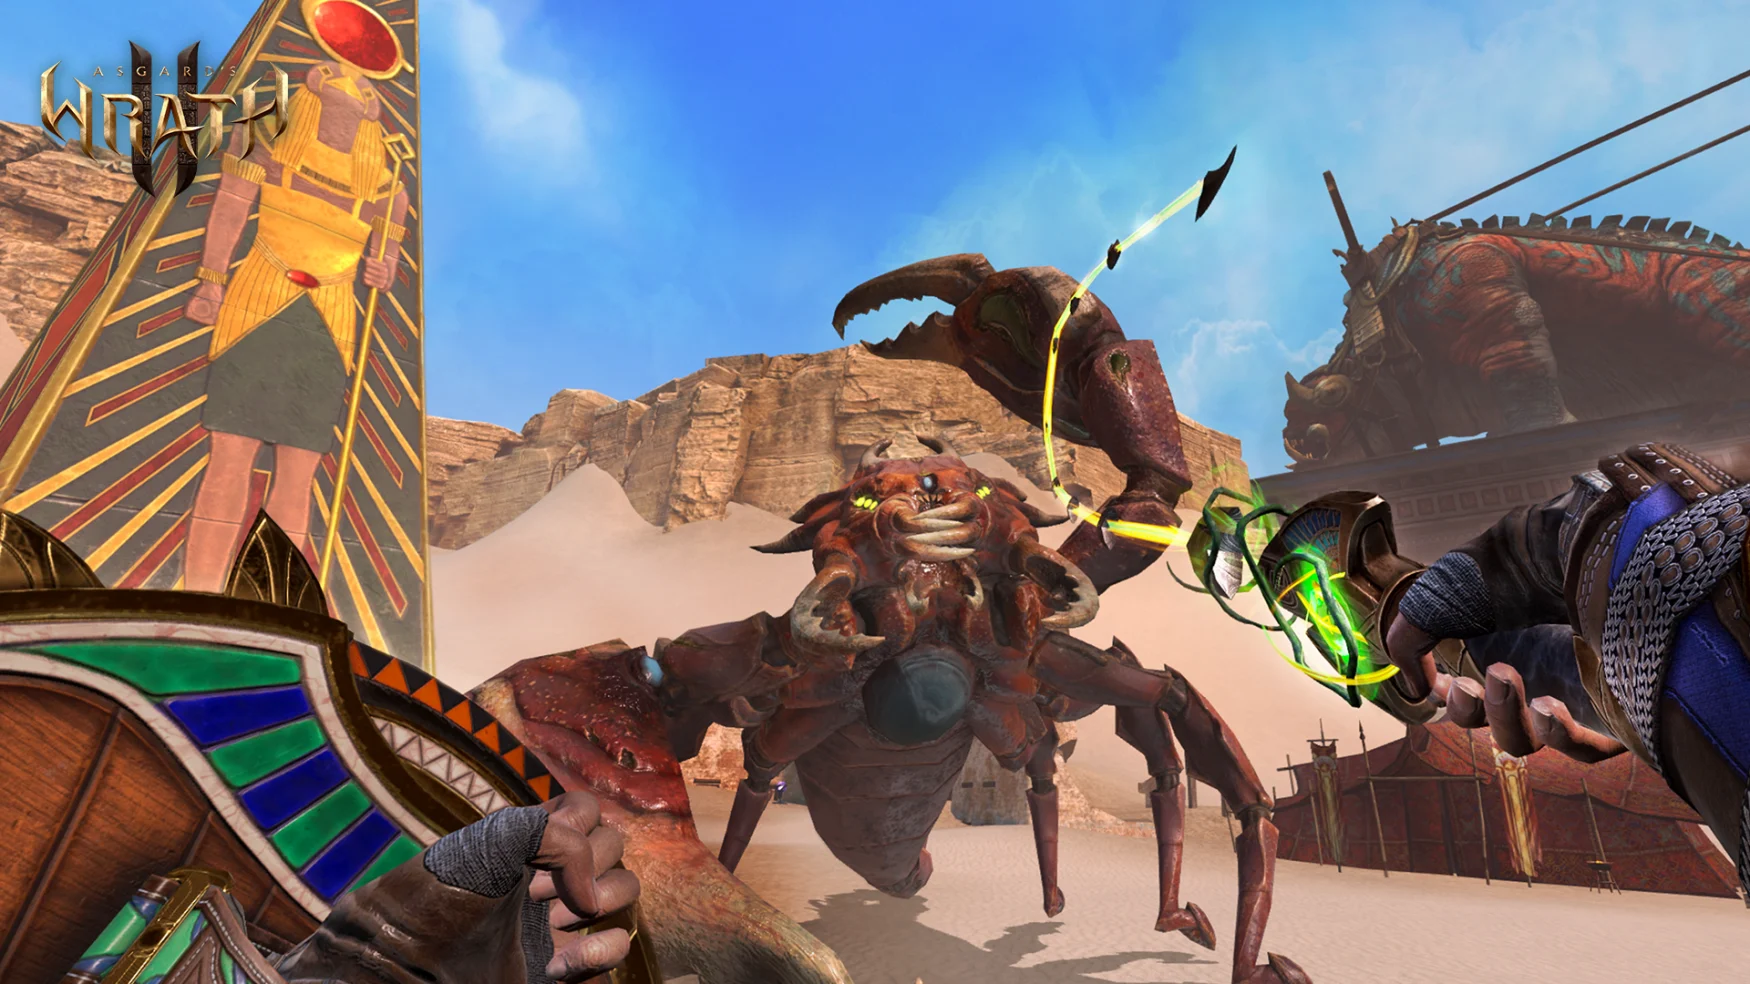 A screenshot of Asgard's Wrath 2 from a first-person perspective.  The player character is shown holding a shield in one hand and lashing a whip with the other.  In front of the player is a large crab-like monster.  To the left is a pillar with art depicting a figure from ancient Egypt.